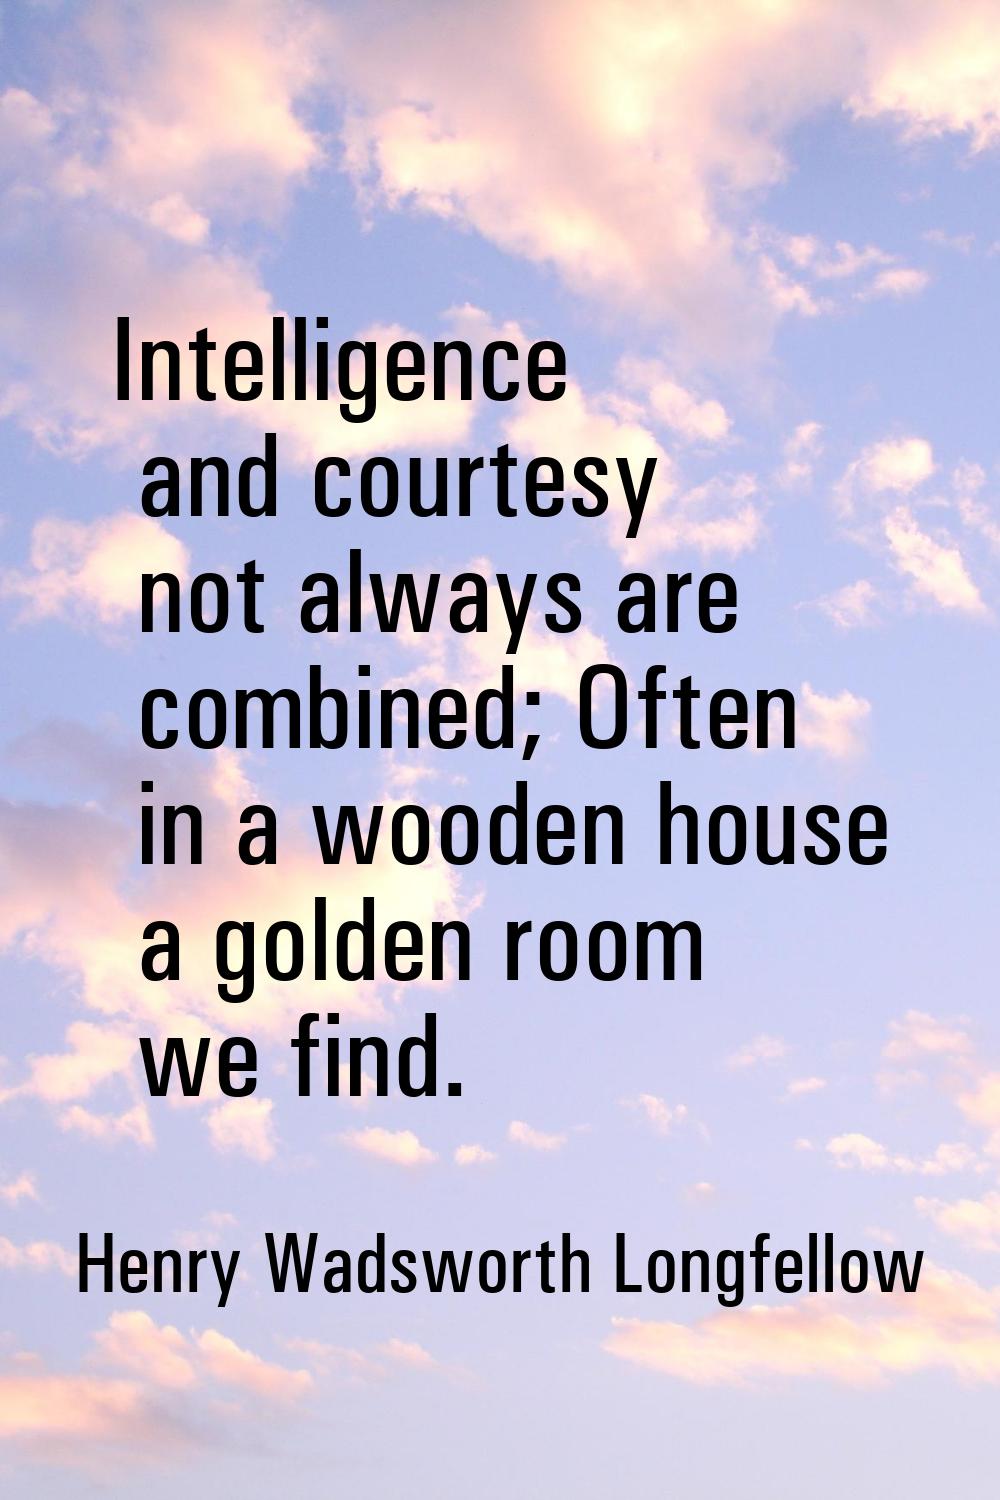 Intelligence and courtesy not always are combined; Often in a wooden house a golden room we find.